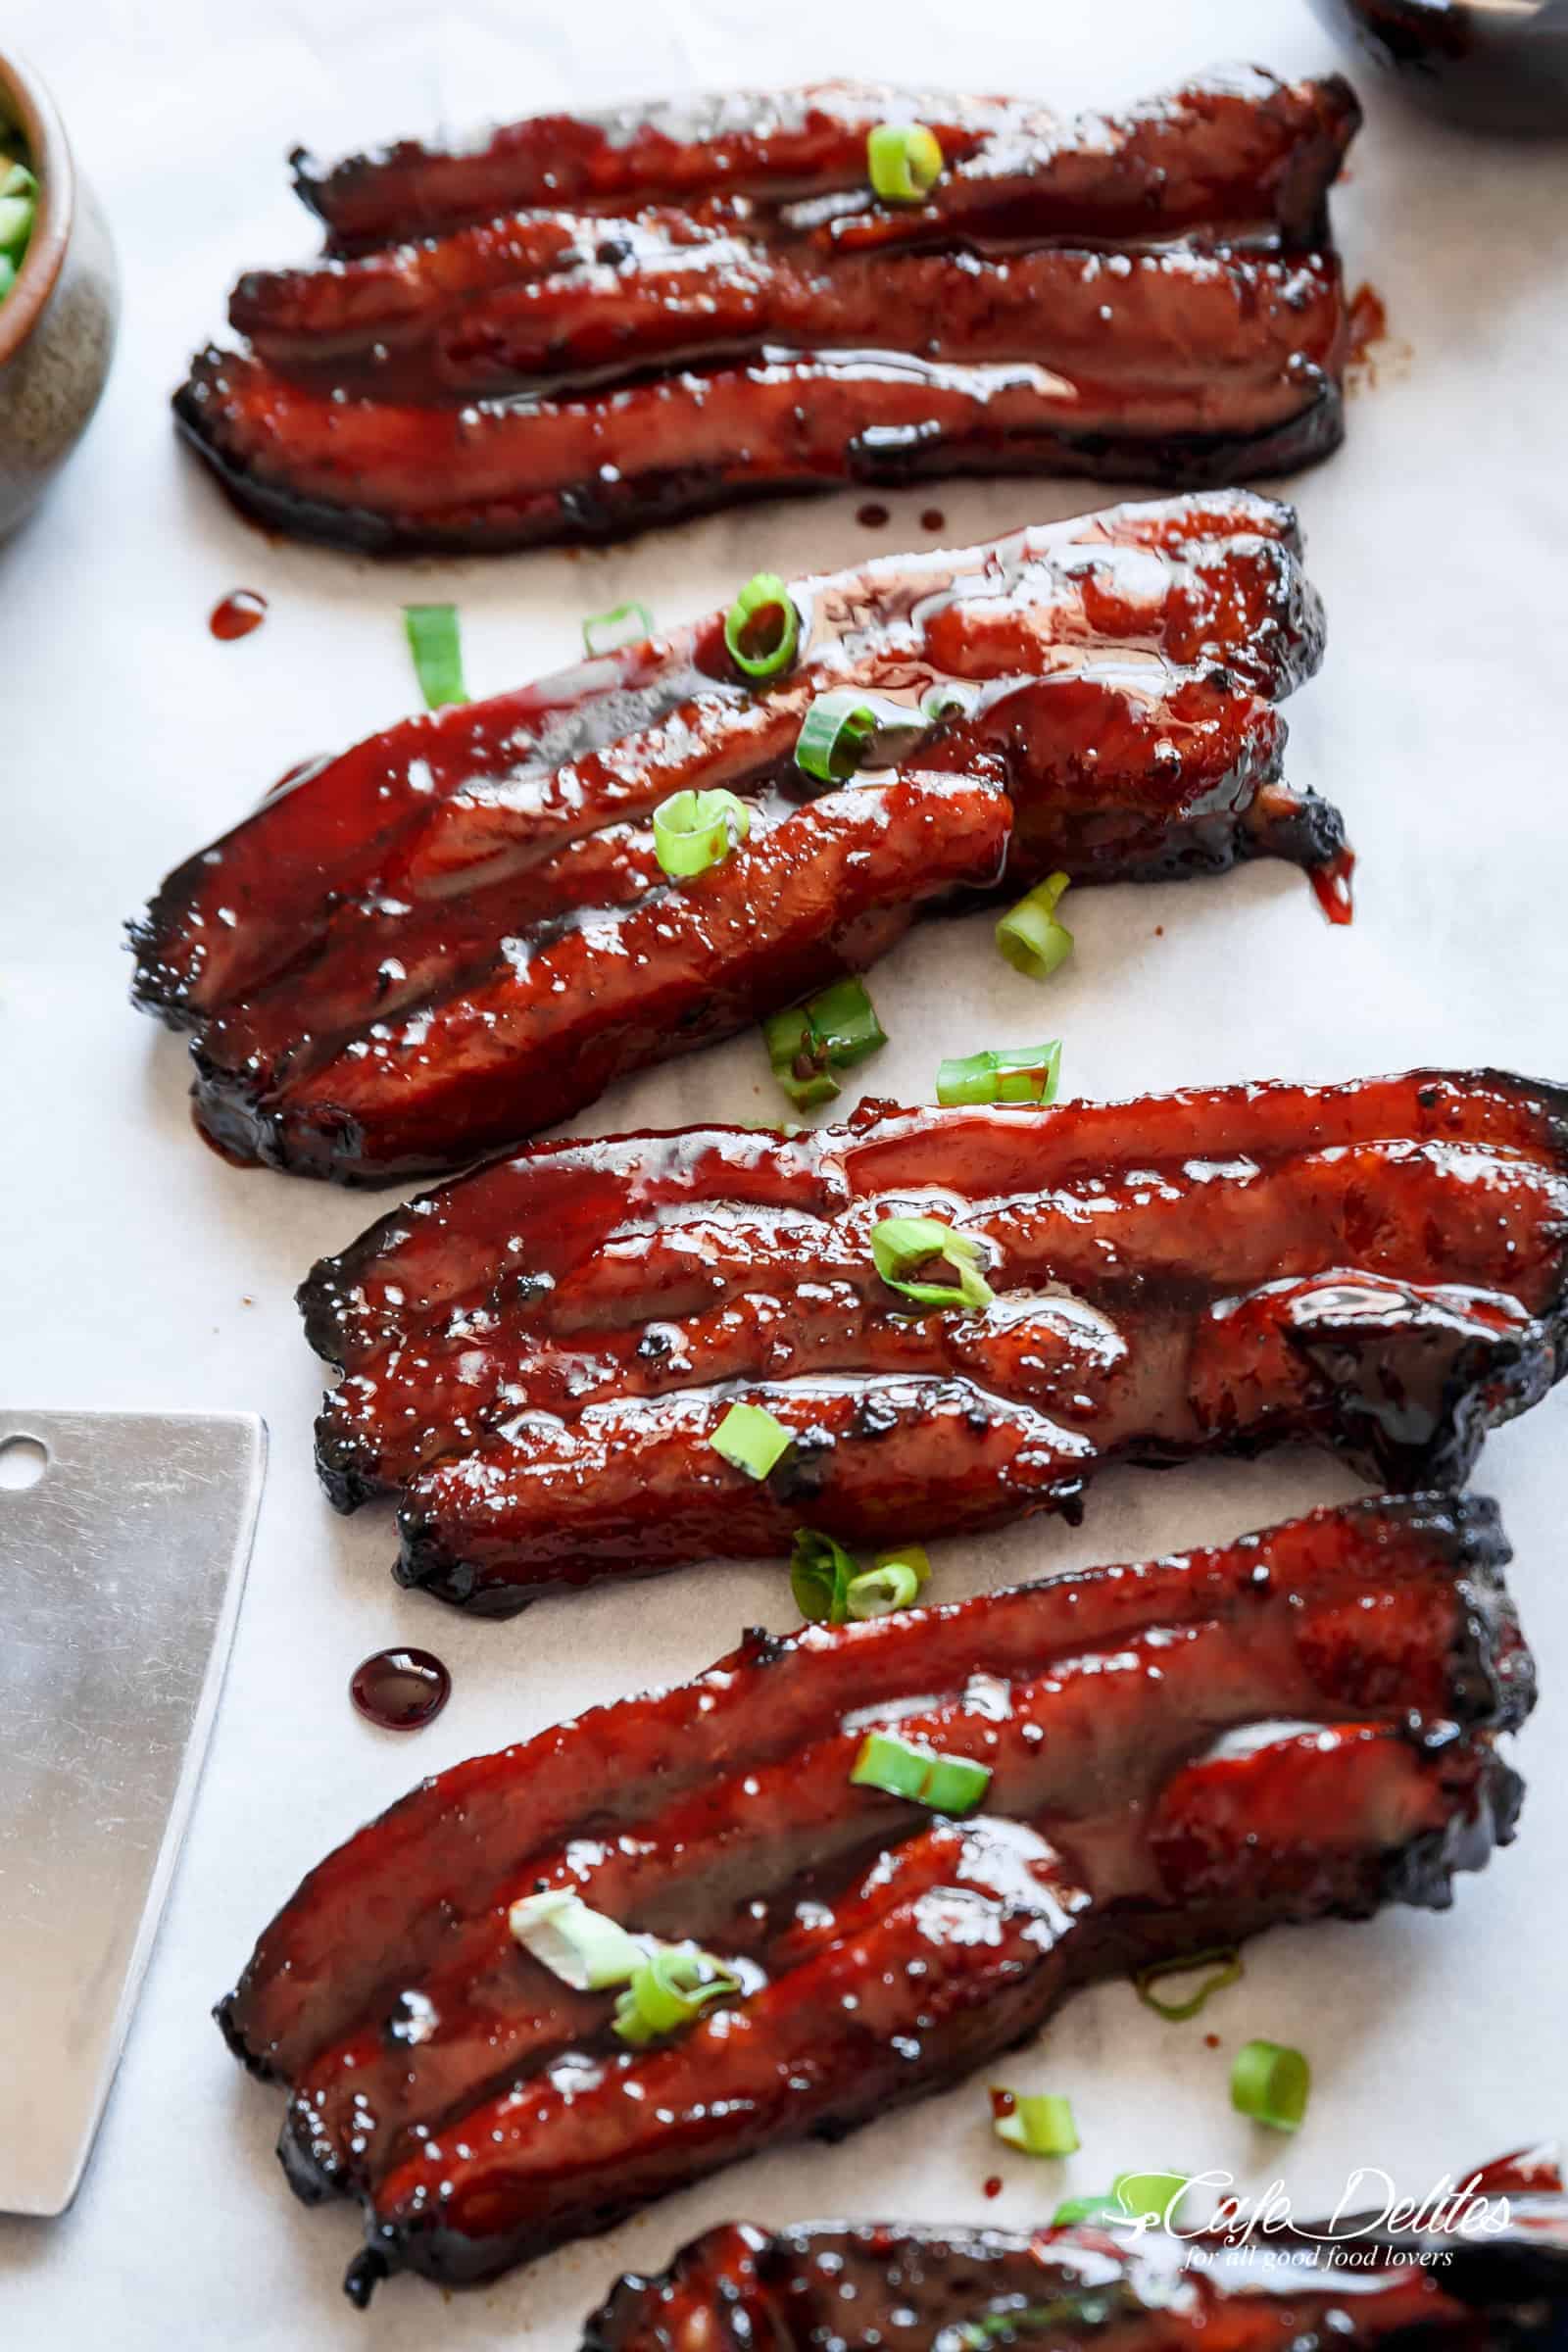 Sticky Chinese Barbecue Pork Belly (Char Siu) | cafedelites.com